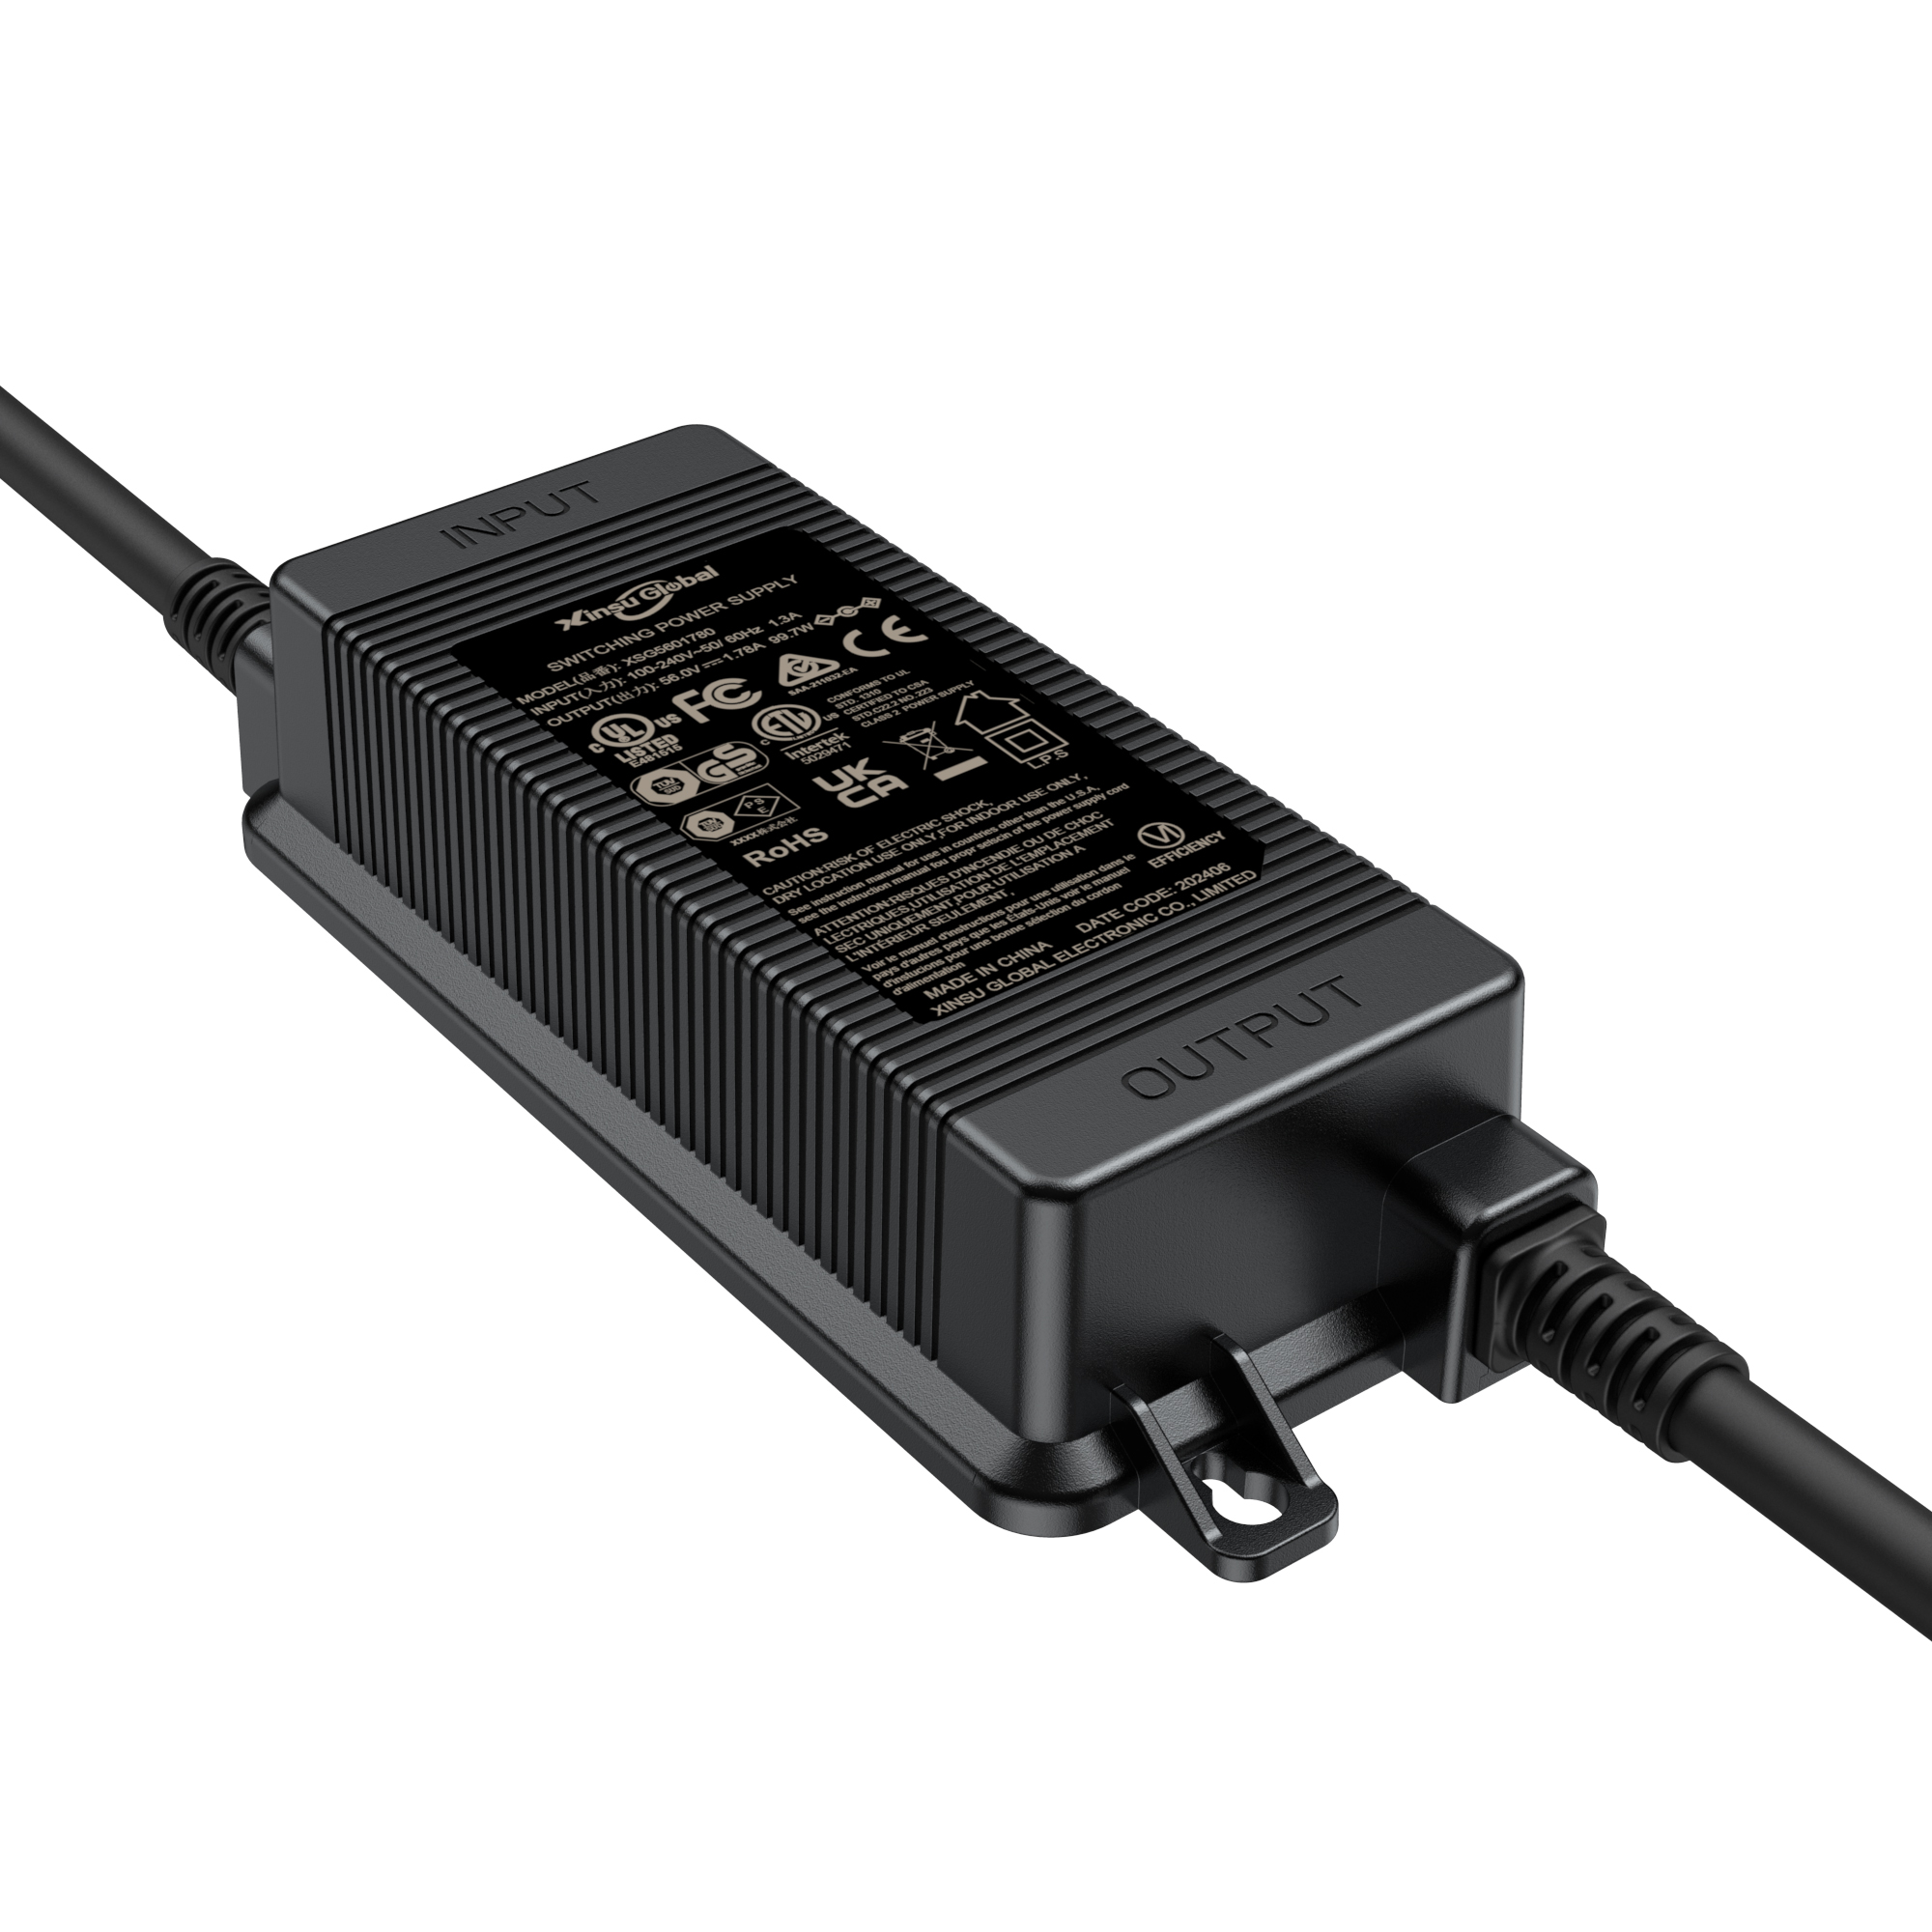 IEC60335-2-29 25.5V 2A IP65 IP67 Waterproof Charger for Robotic Pool Cleaners Underwater Vehicles